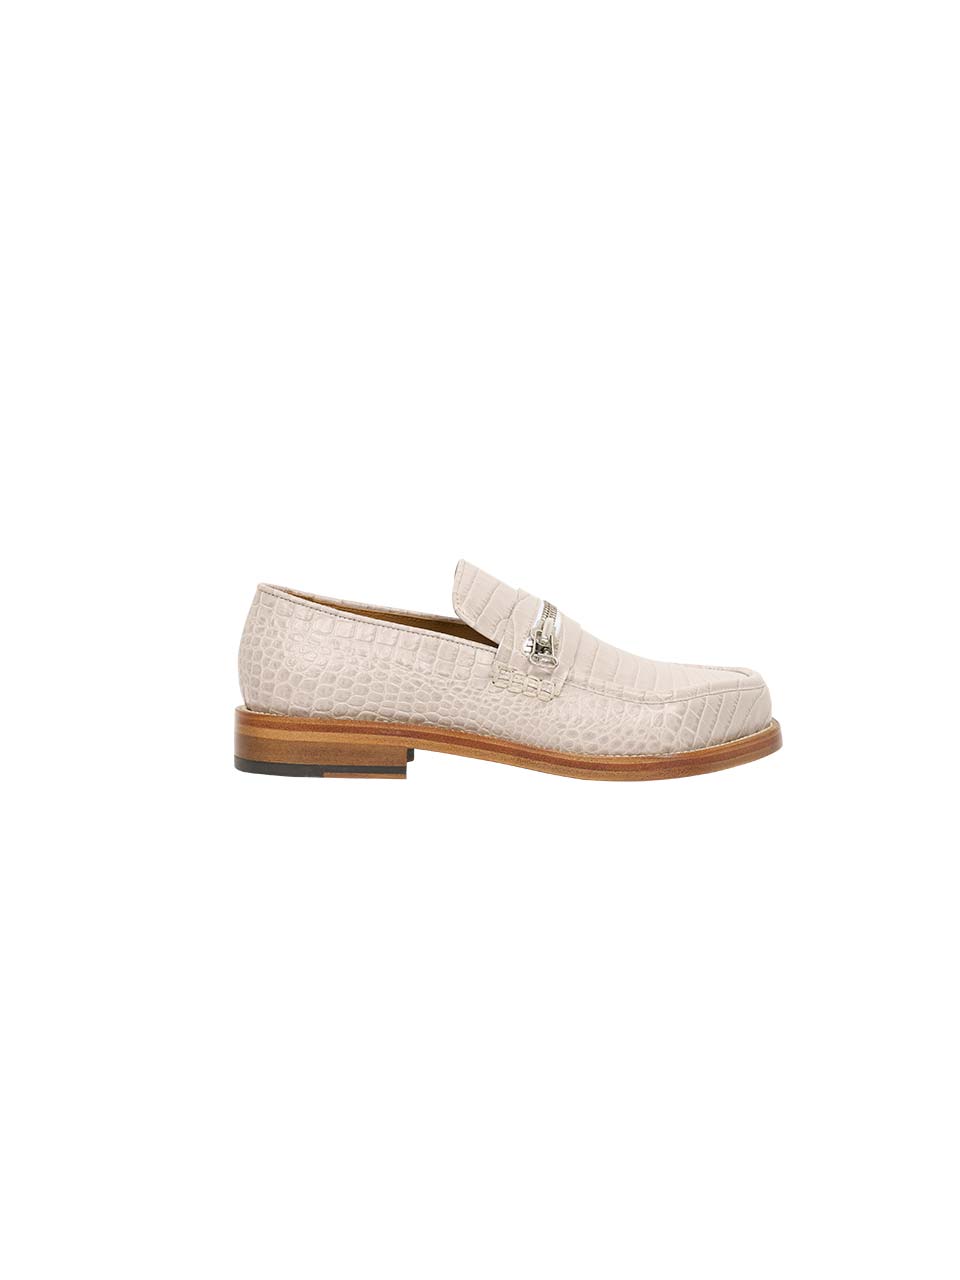 MAGLIANO - ZIPPED MONSTER LOAFER (BEIGE)